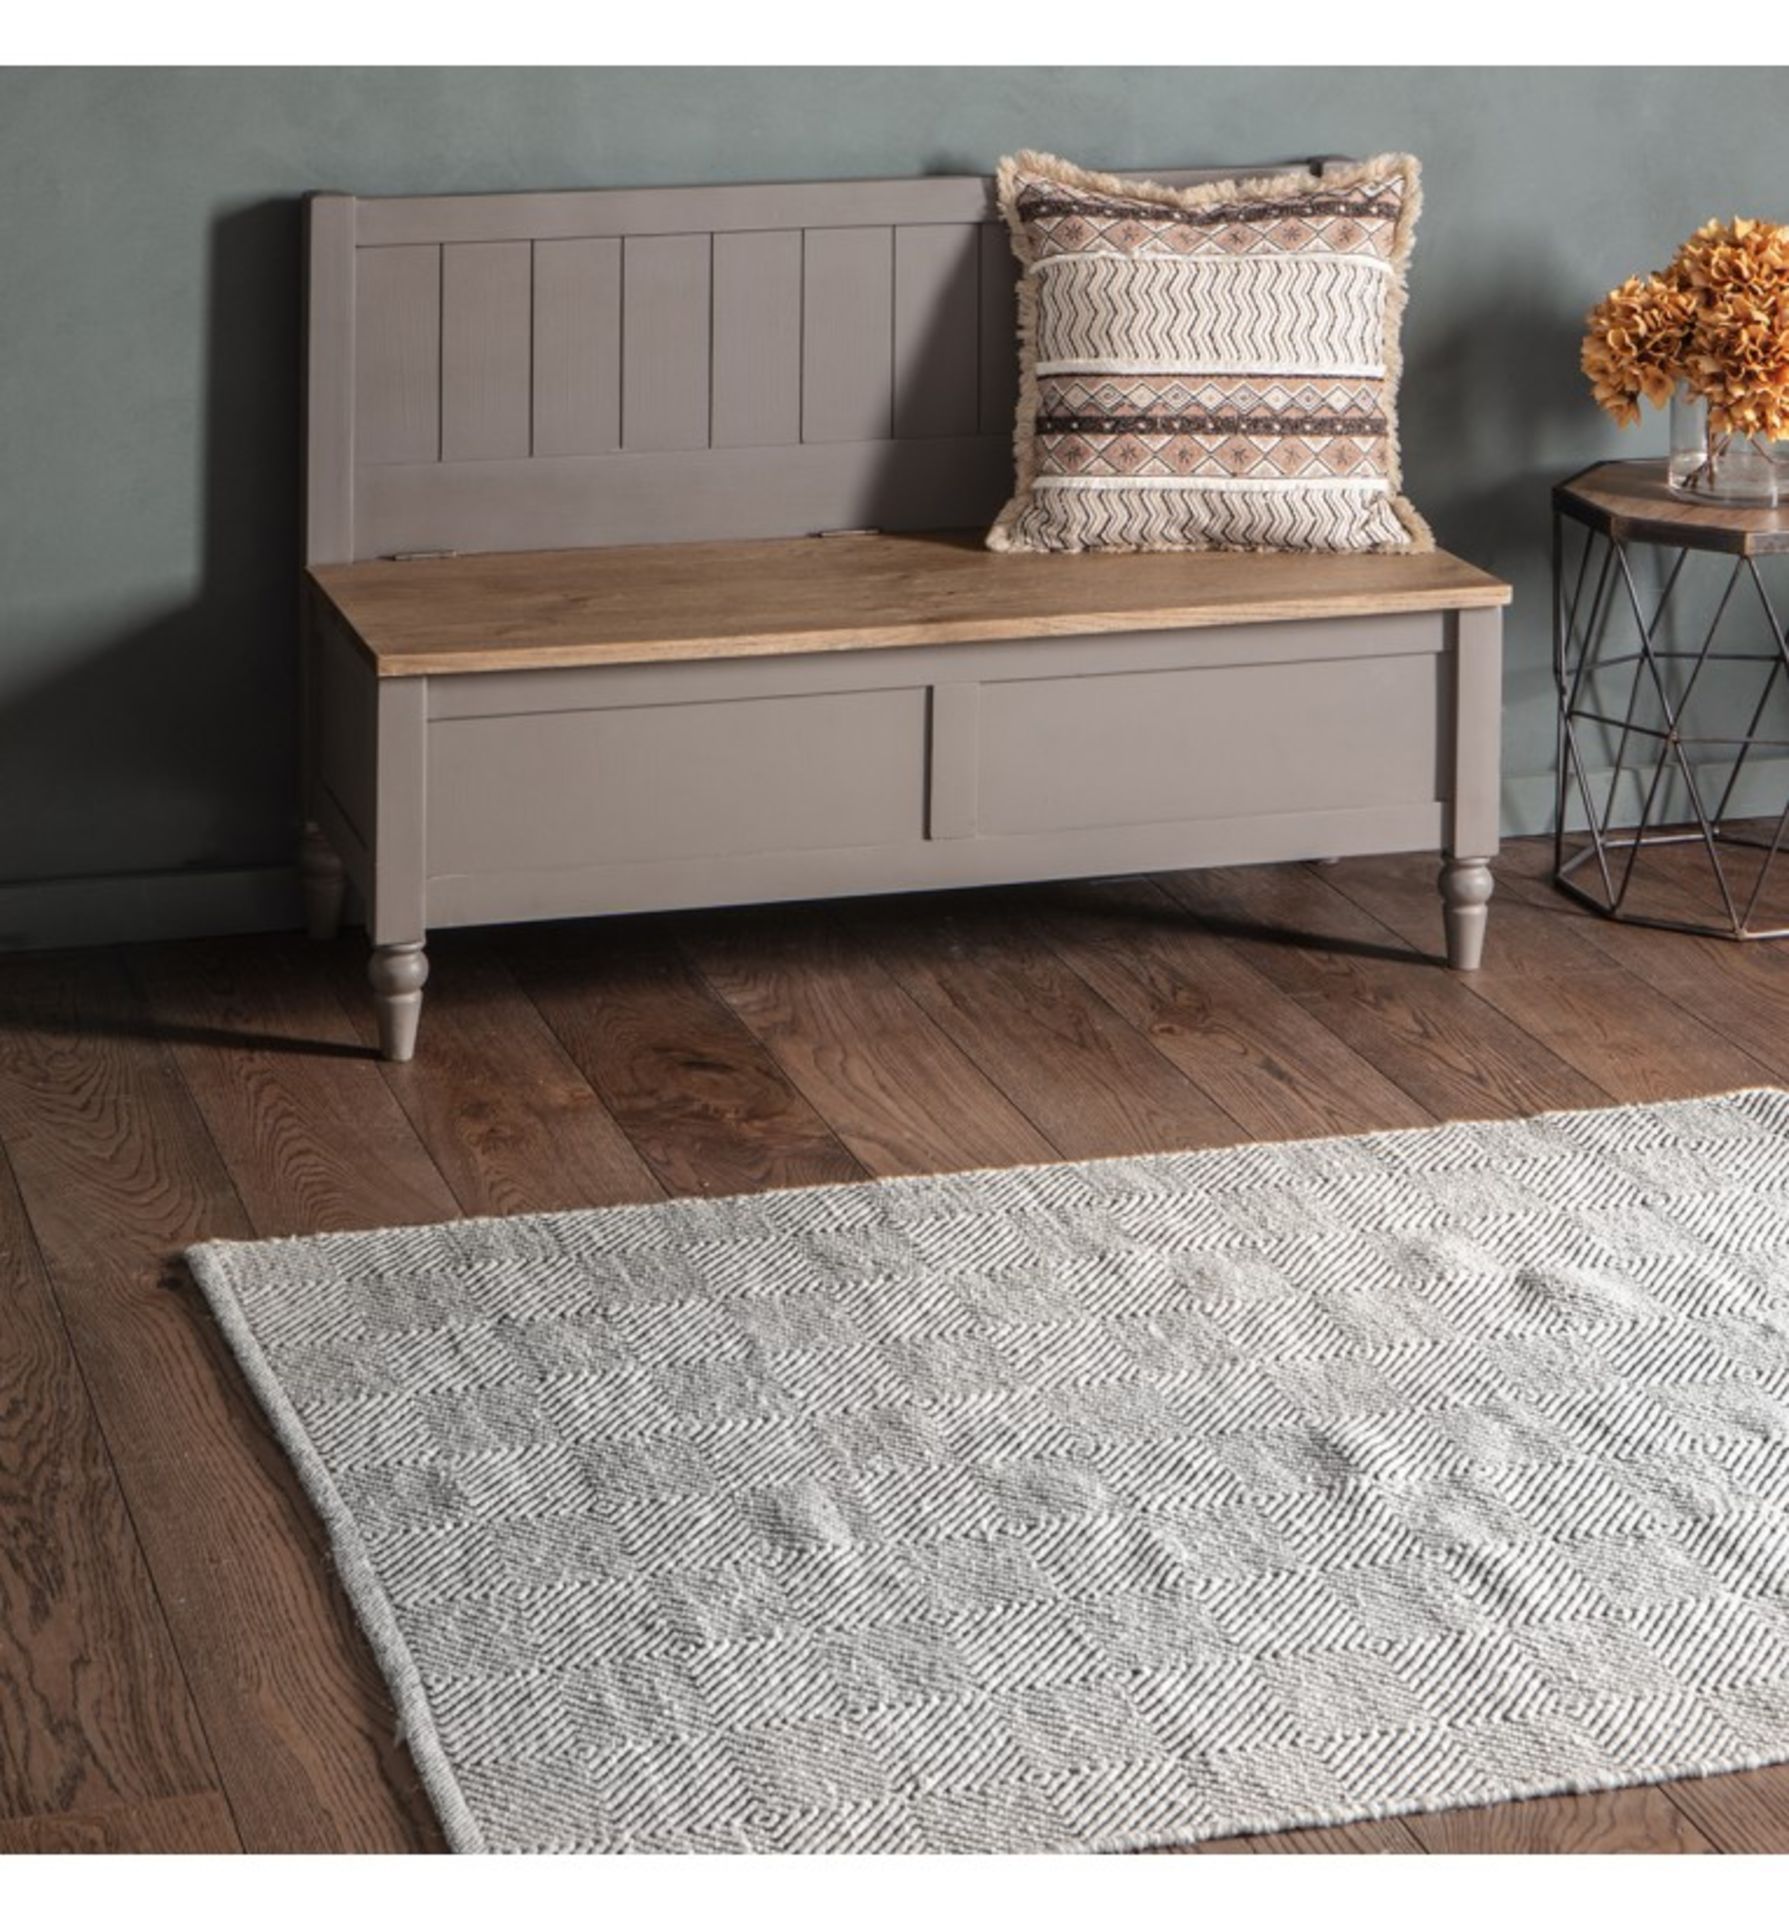 Lima rug in slate grey featurs a geometric inspired diamond pattern in a monochrome finish with a